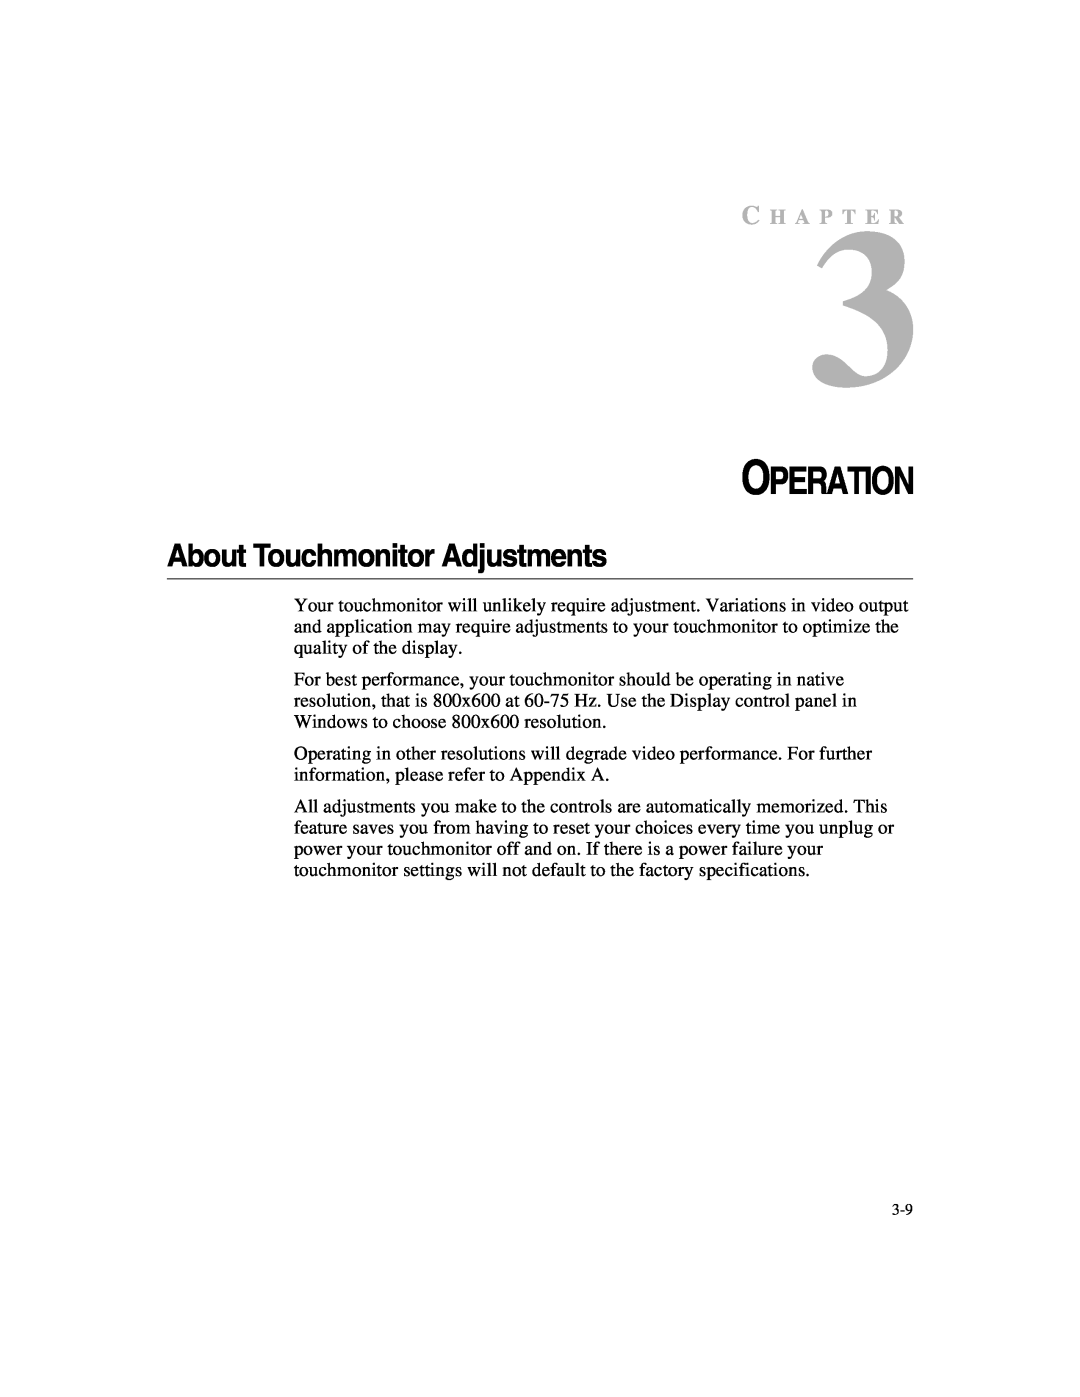 Elo TouchSystems 1247L manual Operation, About Touchmonitor Adjustments, C H A P T E R 